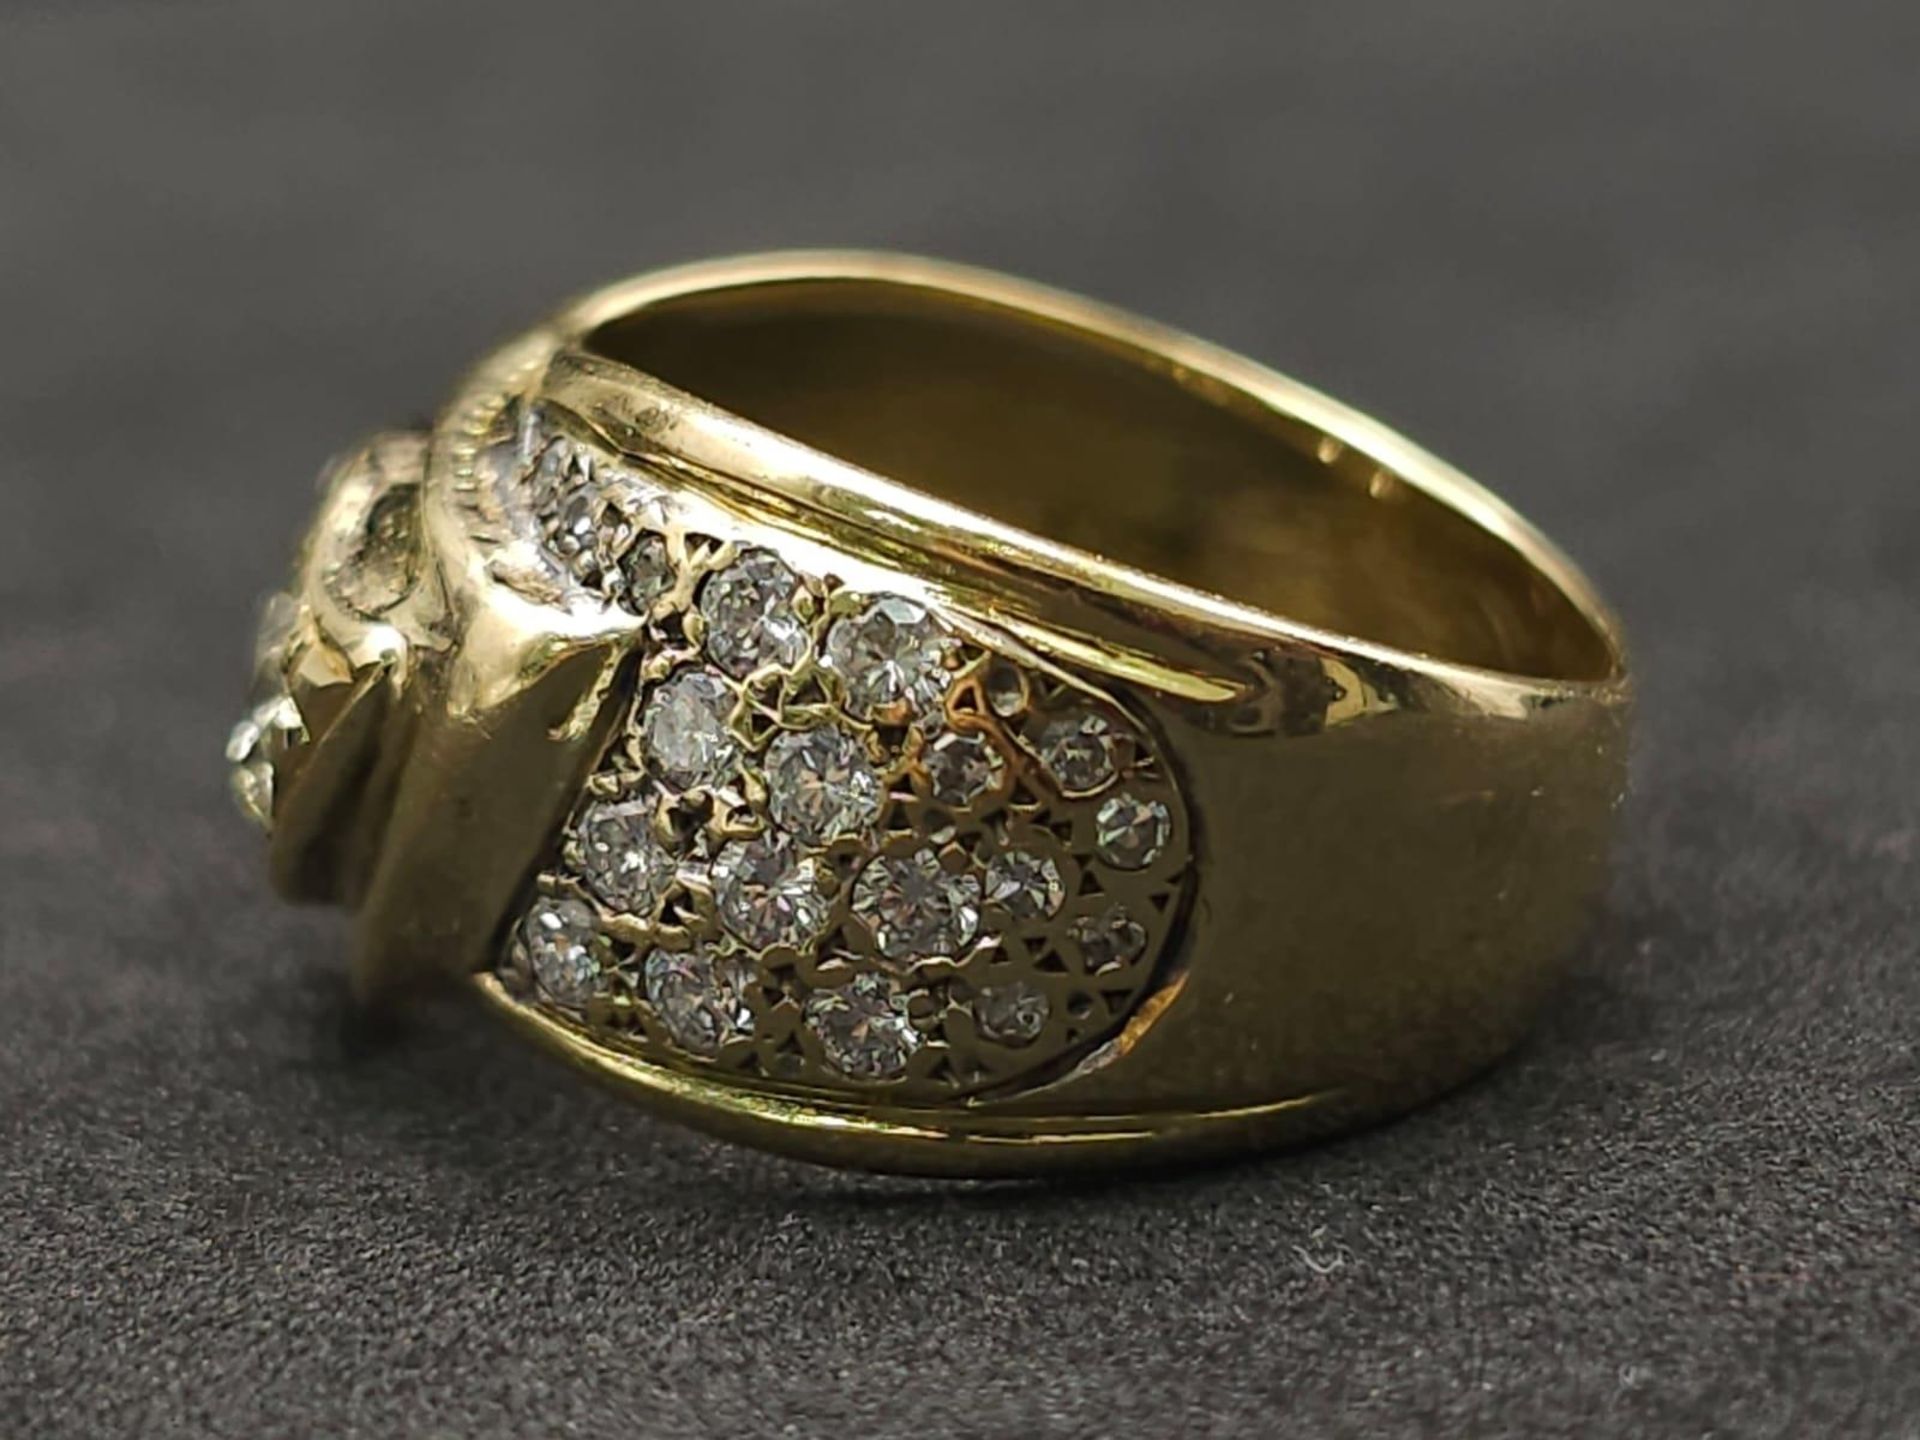 An 18kt Yellow Gold Ring with a duo of Round Cut Diamonds on one side, offset by a pavement of - Image 5 of 8